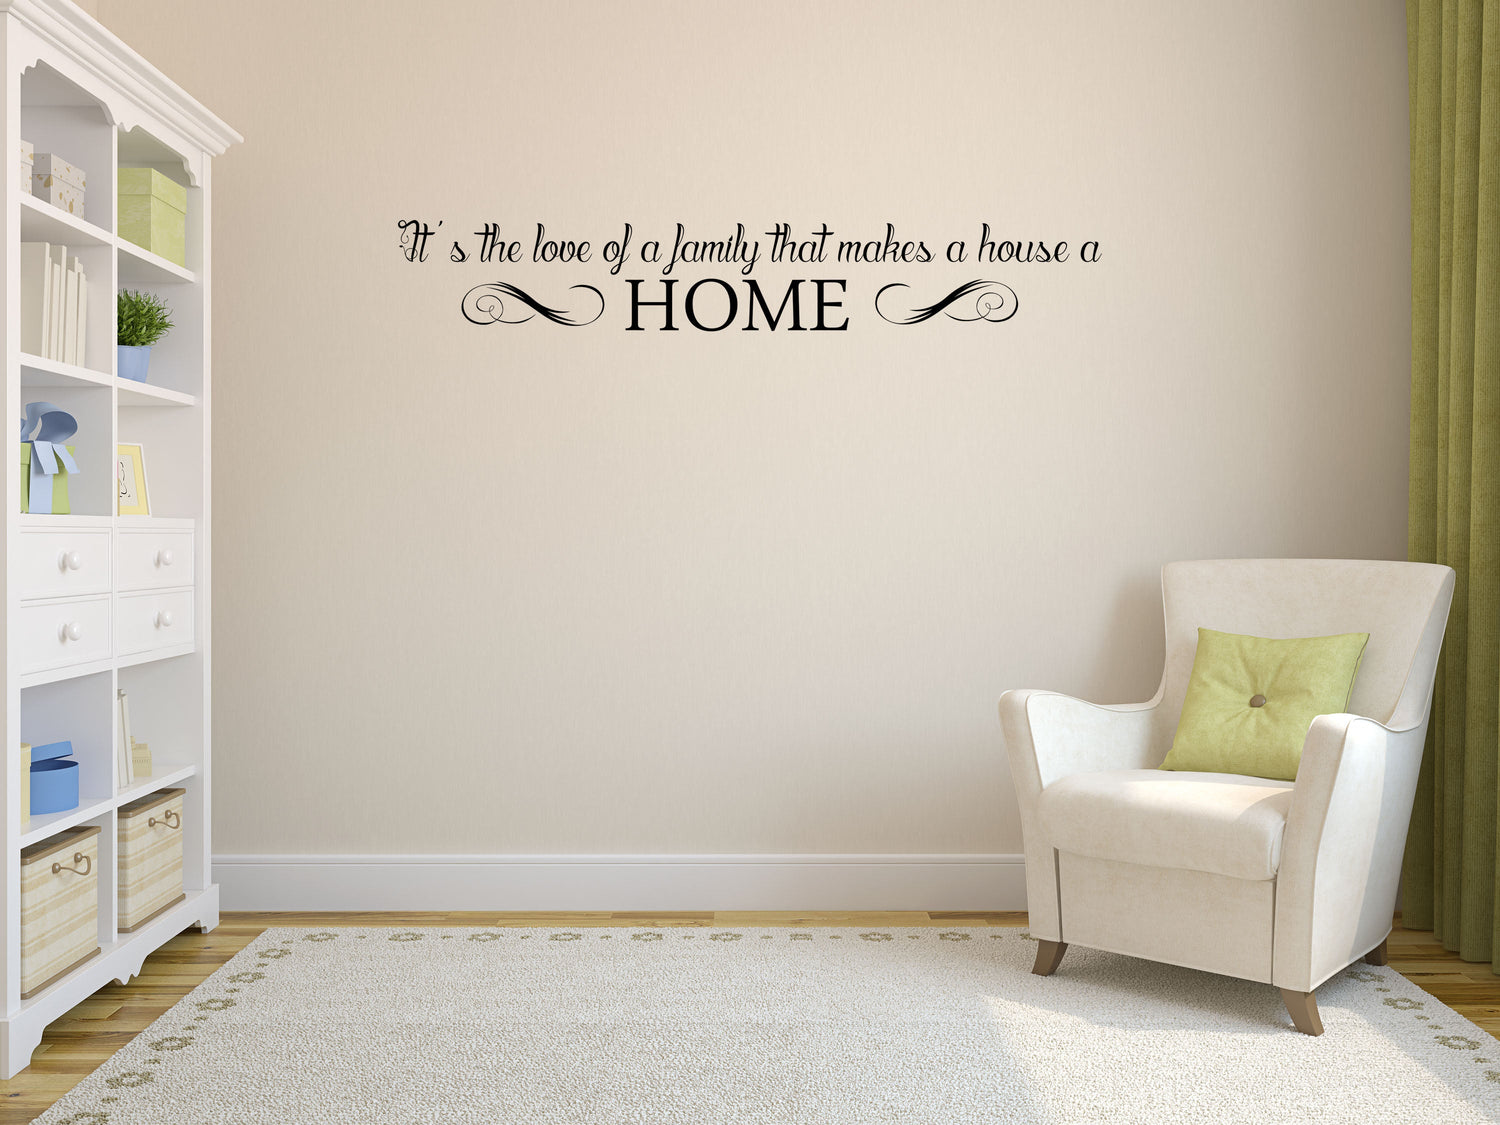 It's The Love of A Family That Makes a House a HOME Vinyl Wall Decal Inspirational Wall Signs 